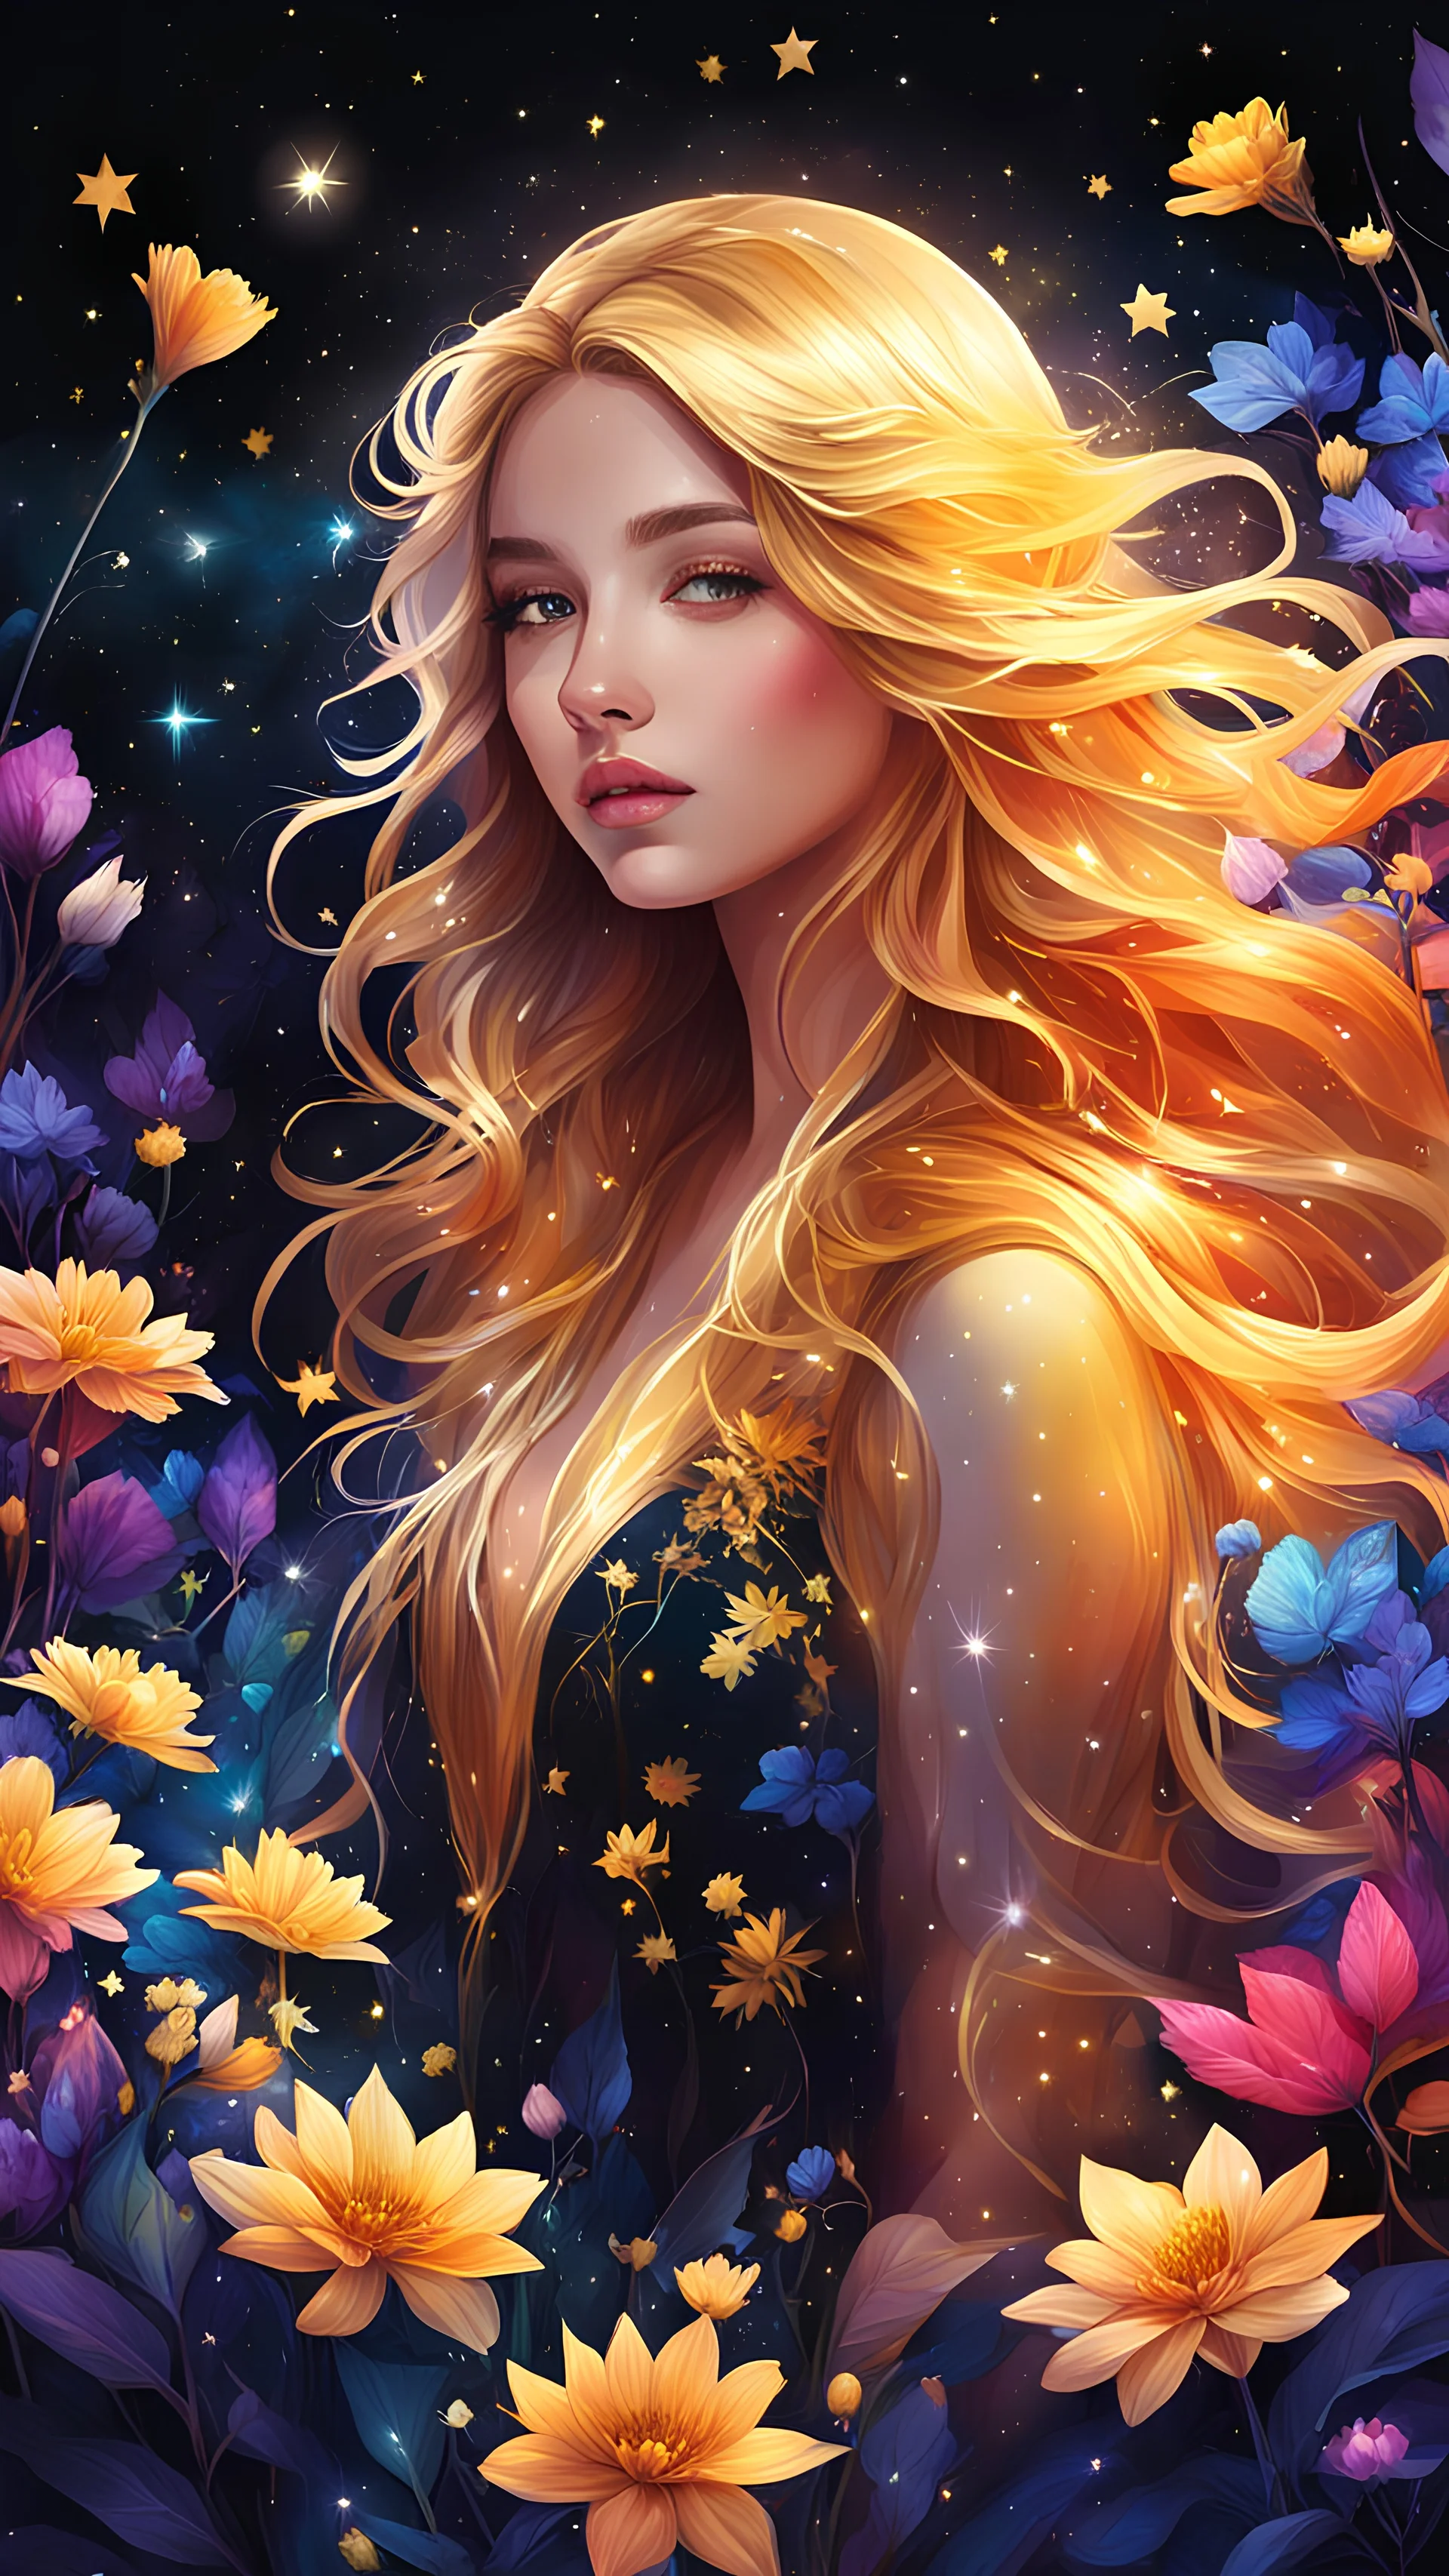 Digital painting, color ink, vivid colors, smooth gradients, magical and otherworldly, a beautiful young girl, golden flowing hair, surrounded by glowing flowers and plants, stars, night sky, halo light, black background, Various colorful flowers, ornamental flowers, glowing effect, magic flowers, shining lights